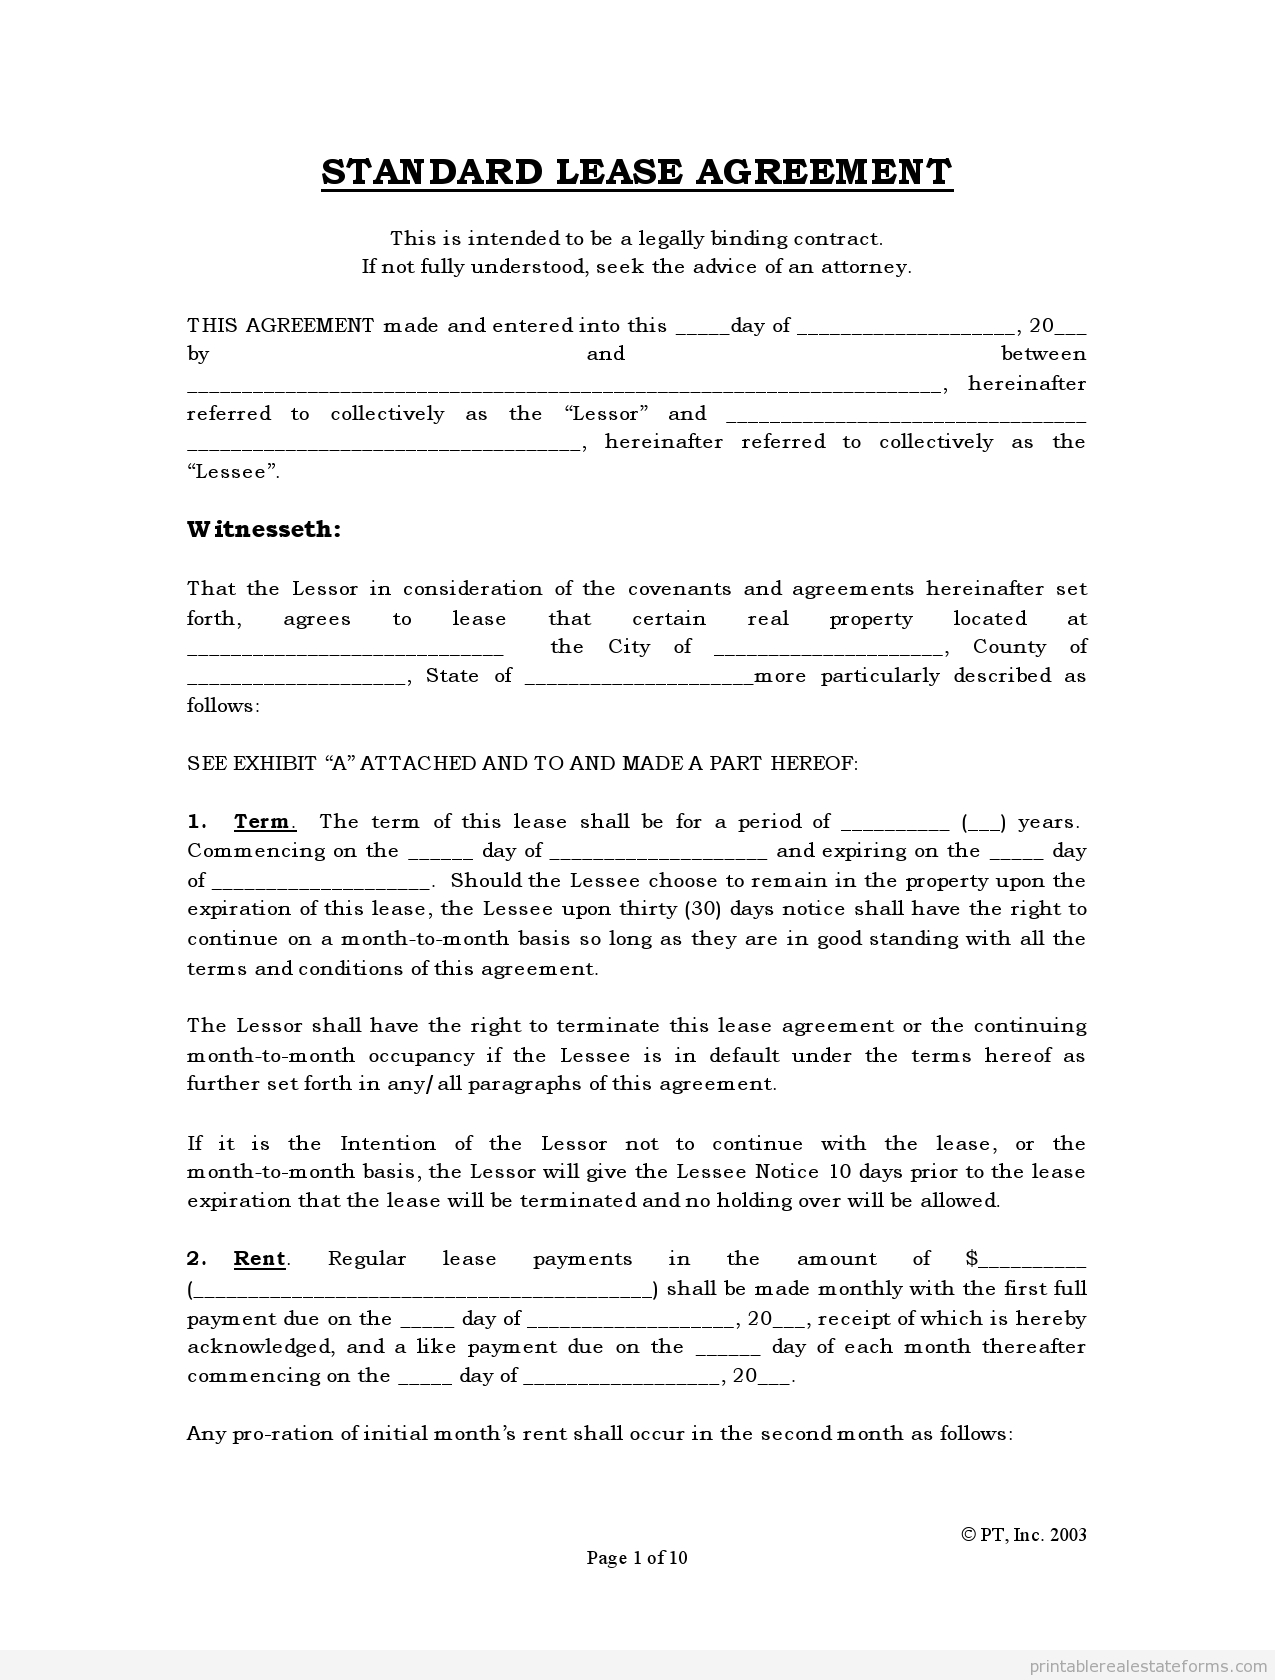 Free Rental Agreements To Print | Free Standard Lease Agreement Form - Free Printable House Rental Forms